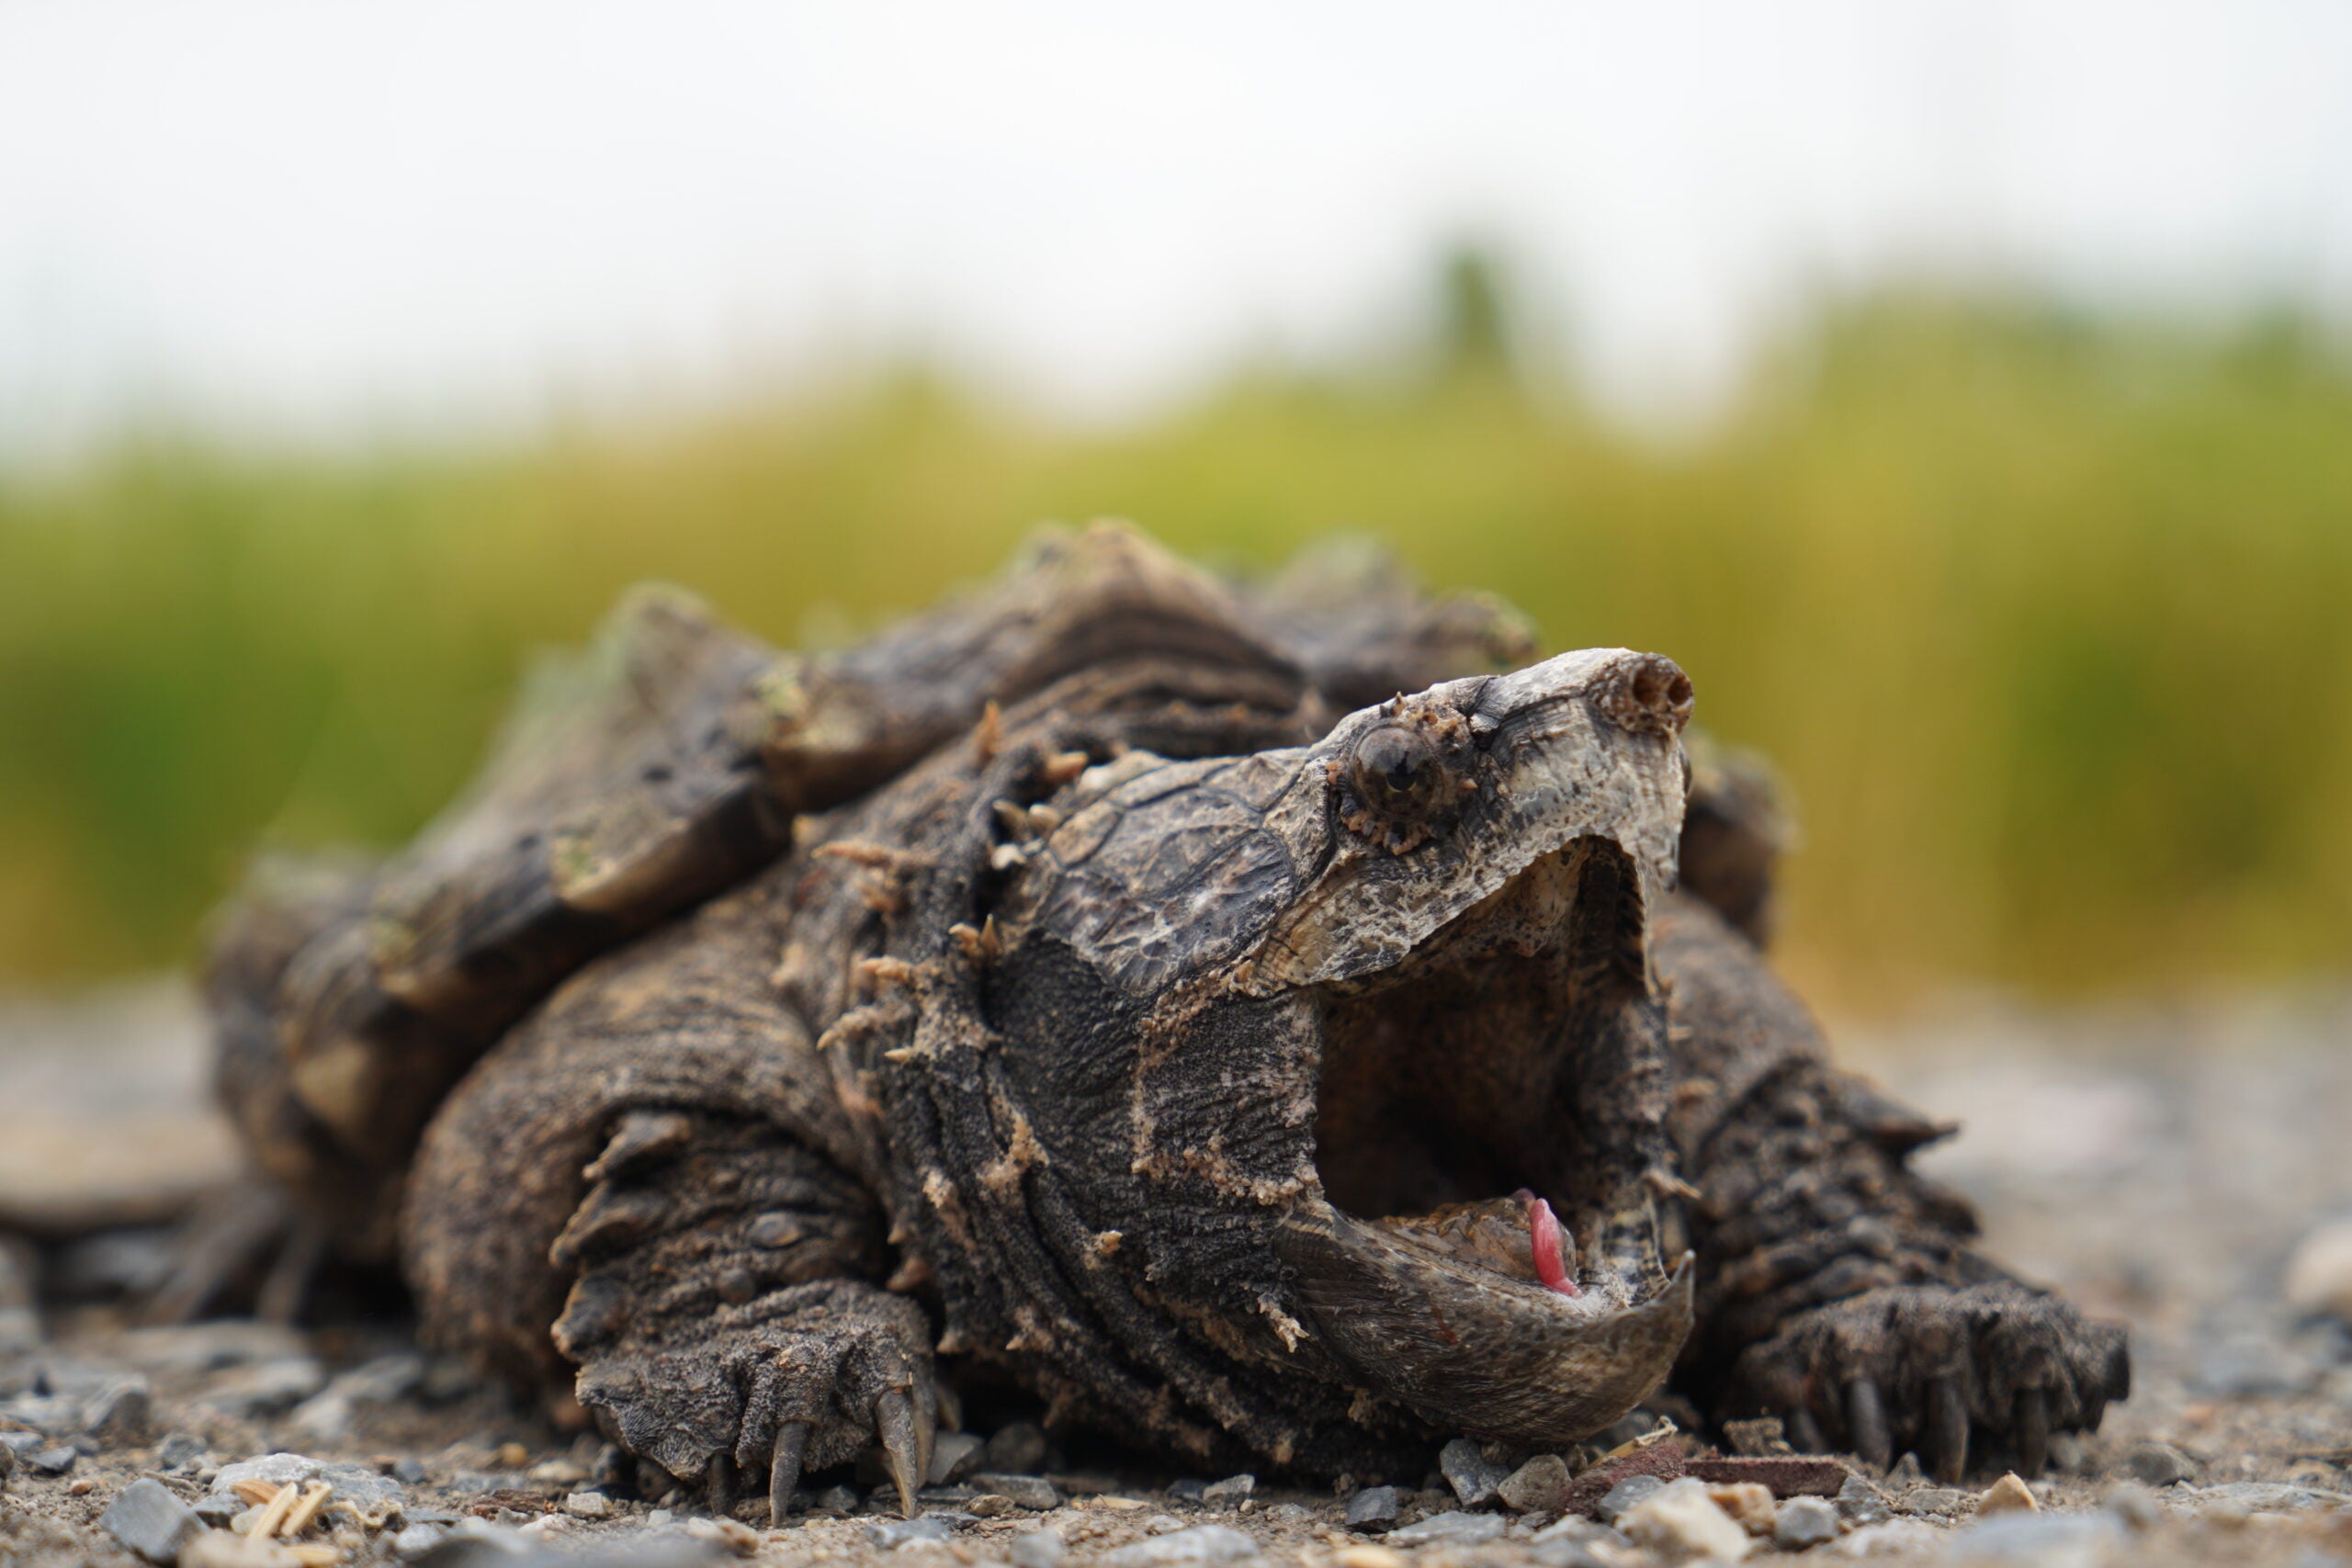 Photo of an alligator snapping turtle